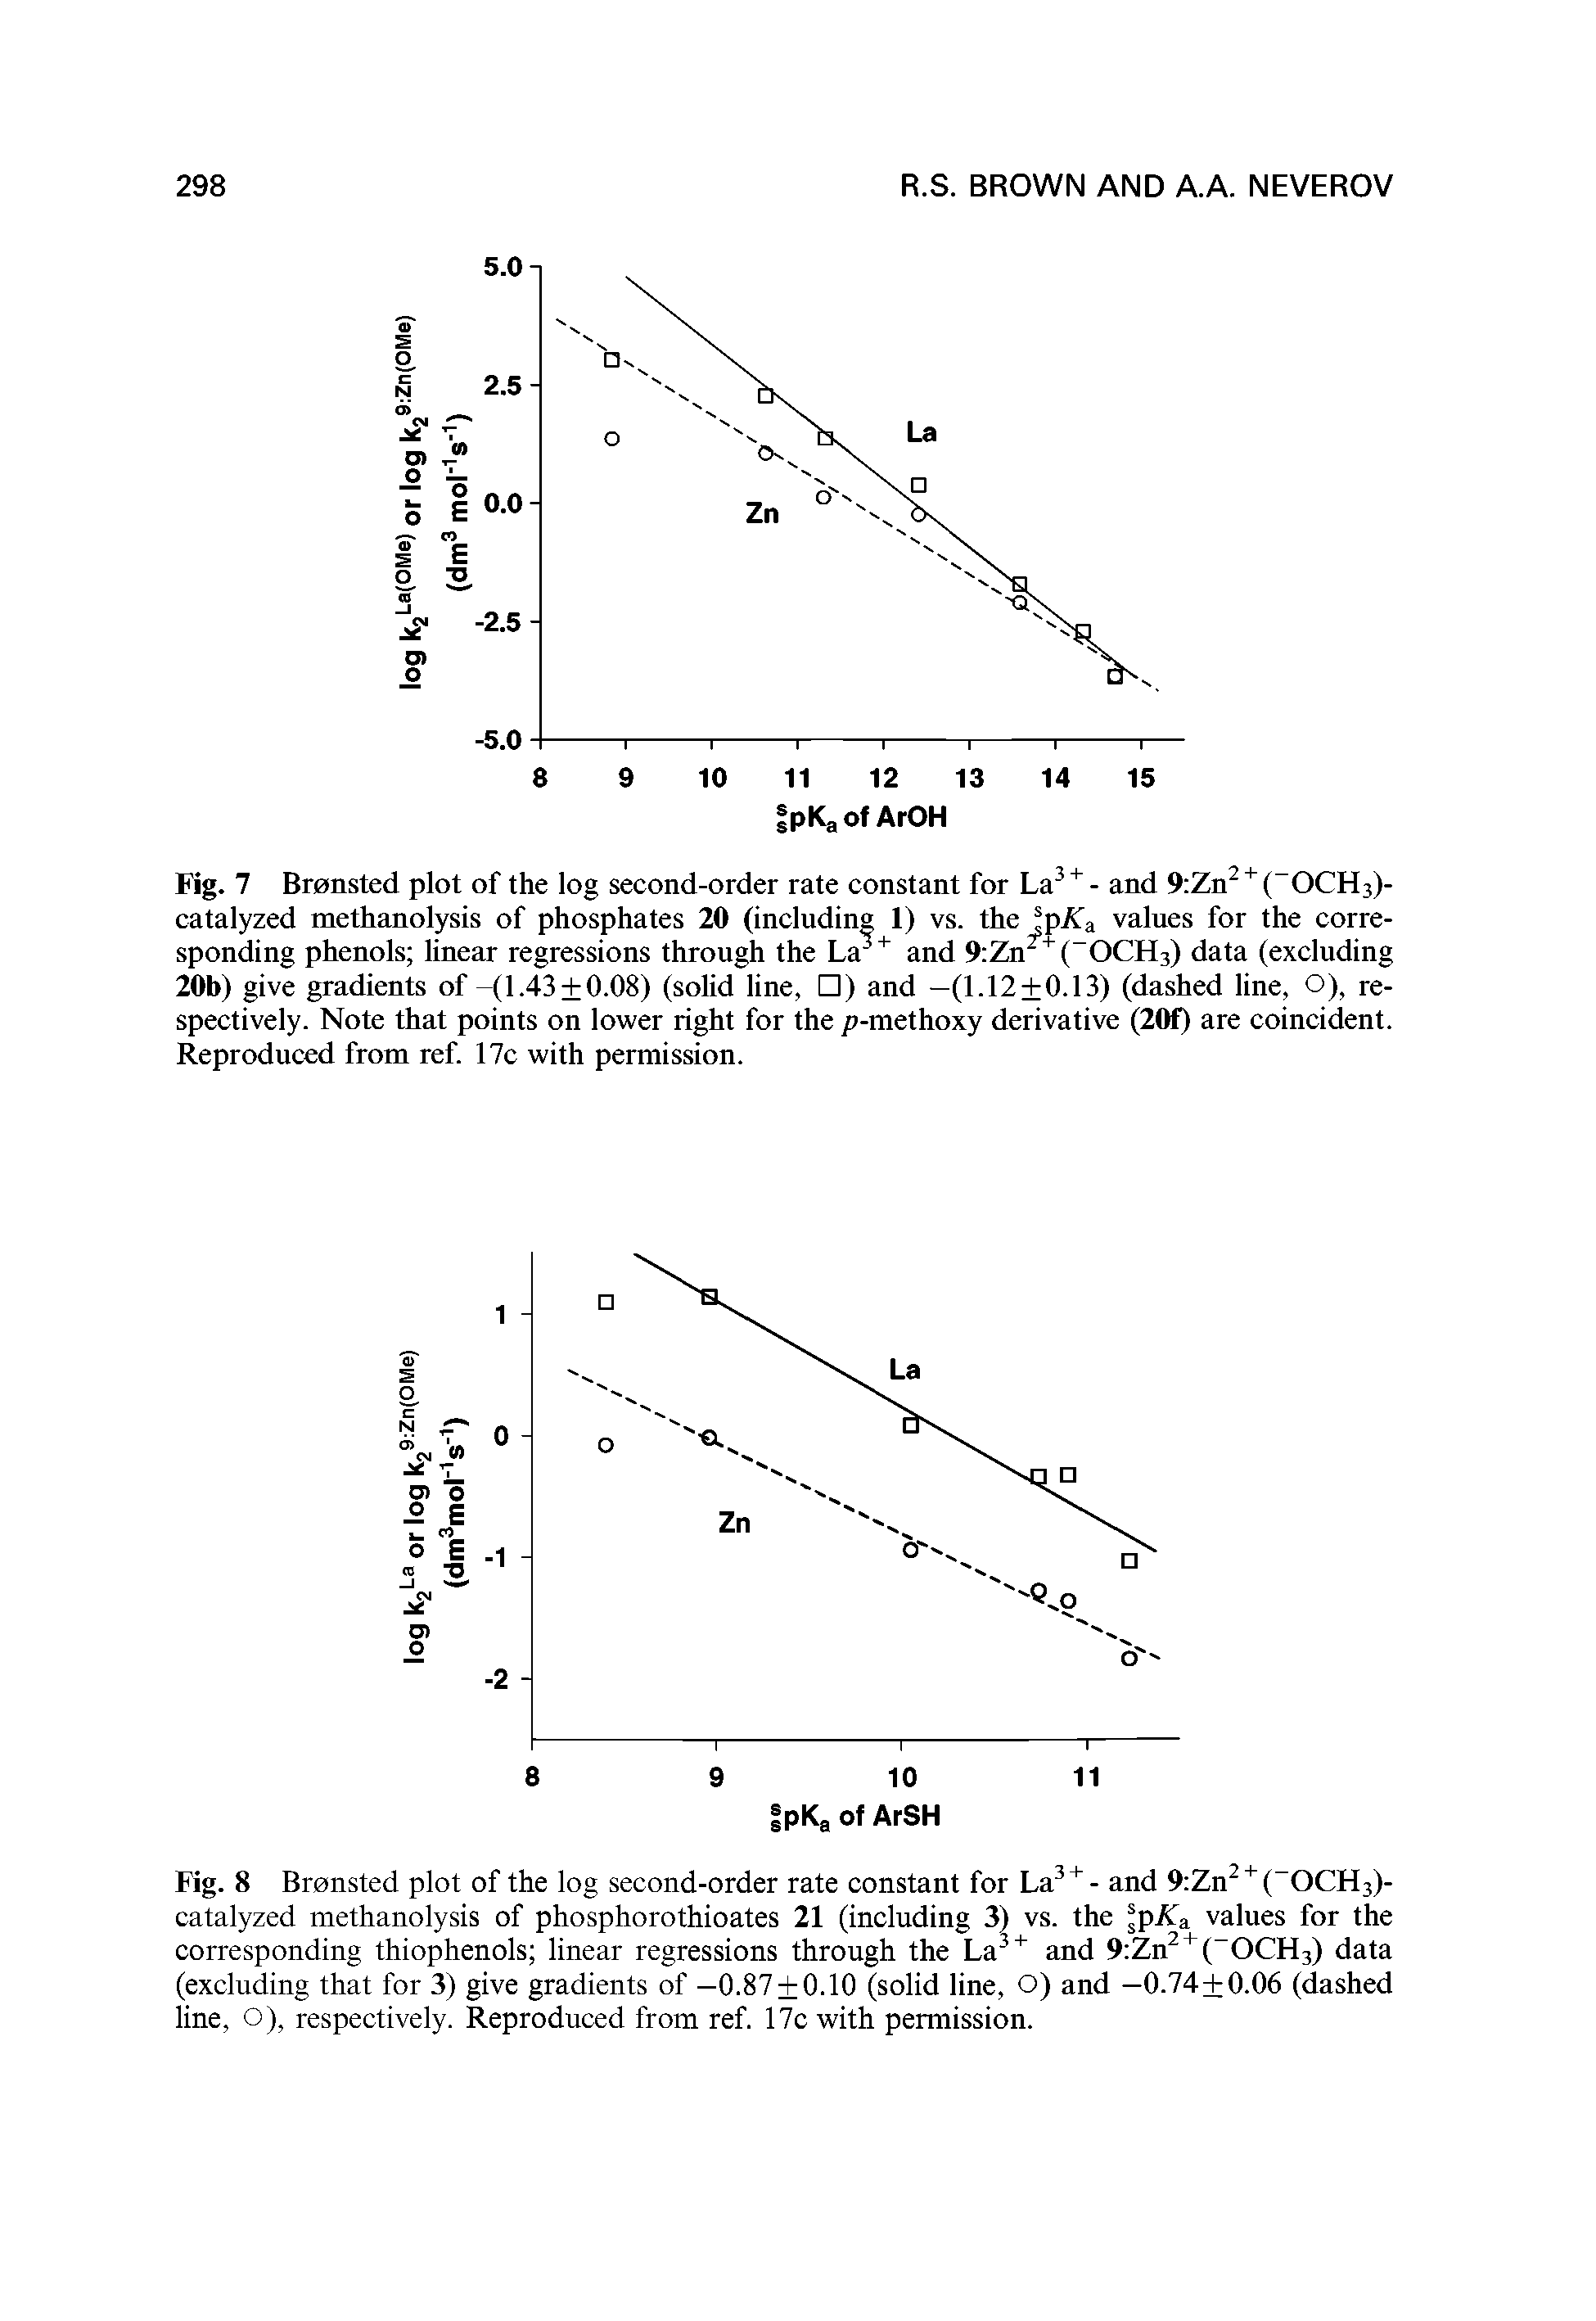 Fig. 7 Bronsted plot of the log second-order rate constant for La3 + - and 9 Zn2 + ( OCH3)-catalyzed methanolysis of phosphates 20 (including 1) vs. the JpA a values for the corresponding phenols linear regressions through the La3 + and 9 Zn +( OCH3) data (excluding 20b) give gradients of (1.43 0.08) (solid line, ) and —(1.12 0.13) (dashed line, O), respectively. Note that points on lower right for the p-methoxy derivative (20f) are coincident. Reproduced from ref. 17c with permission.